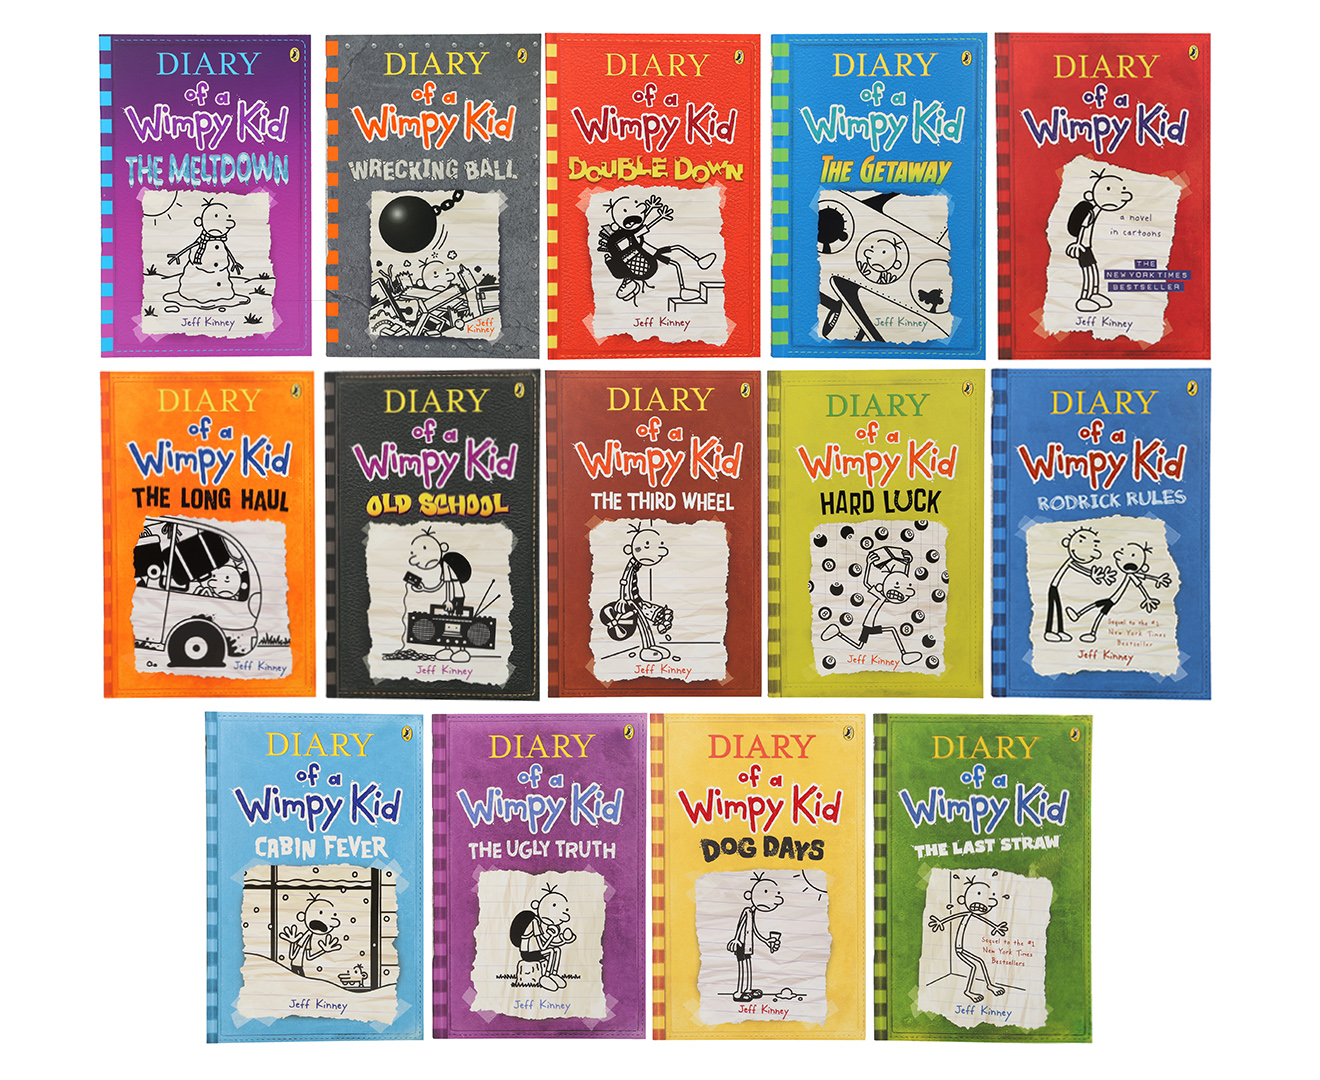 diary of a wimpy kid books in order